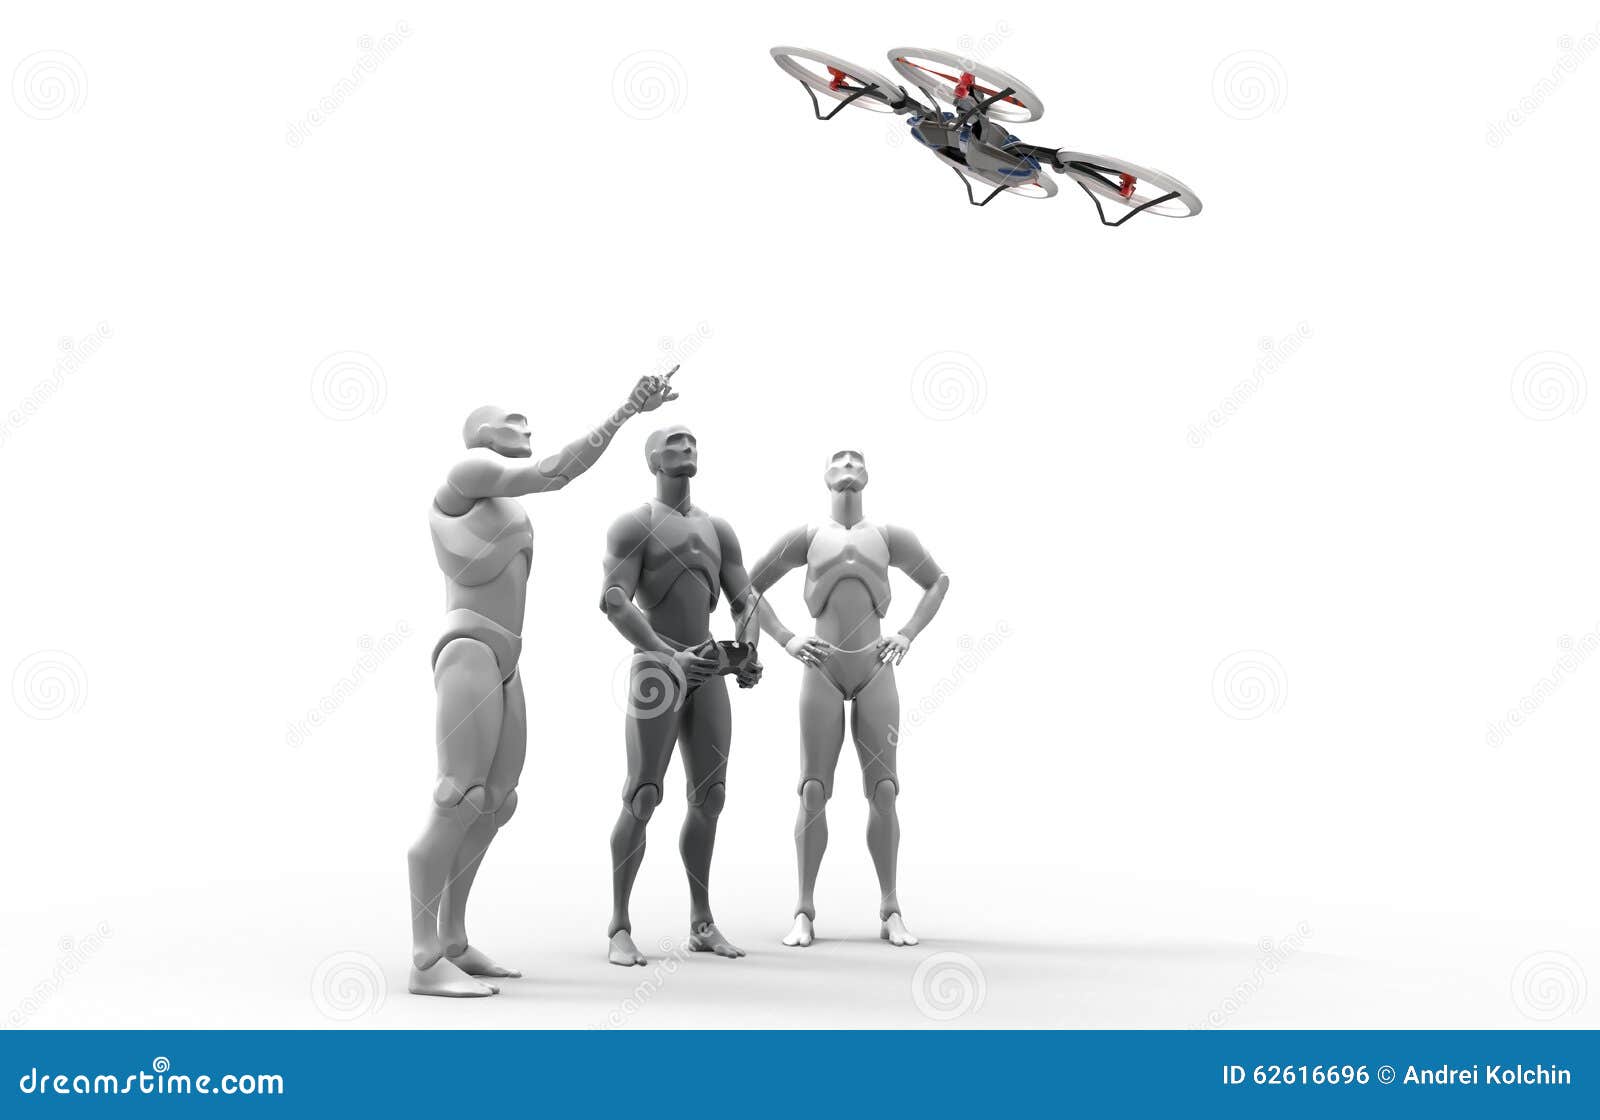 three dimensional human play with quadcopter